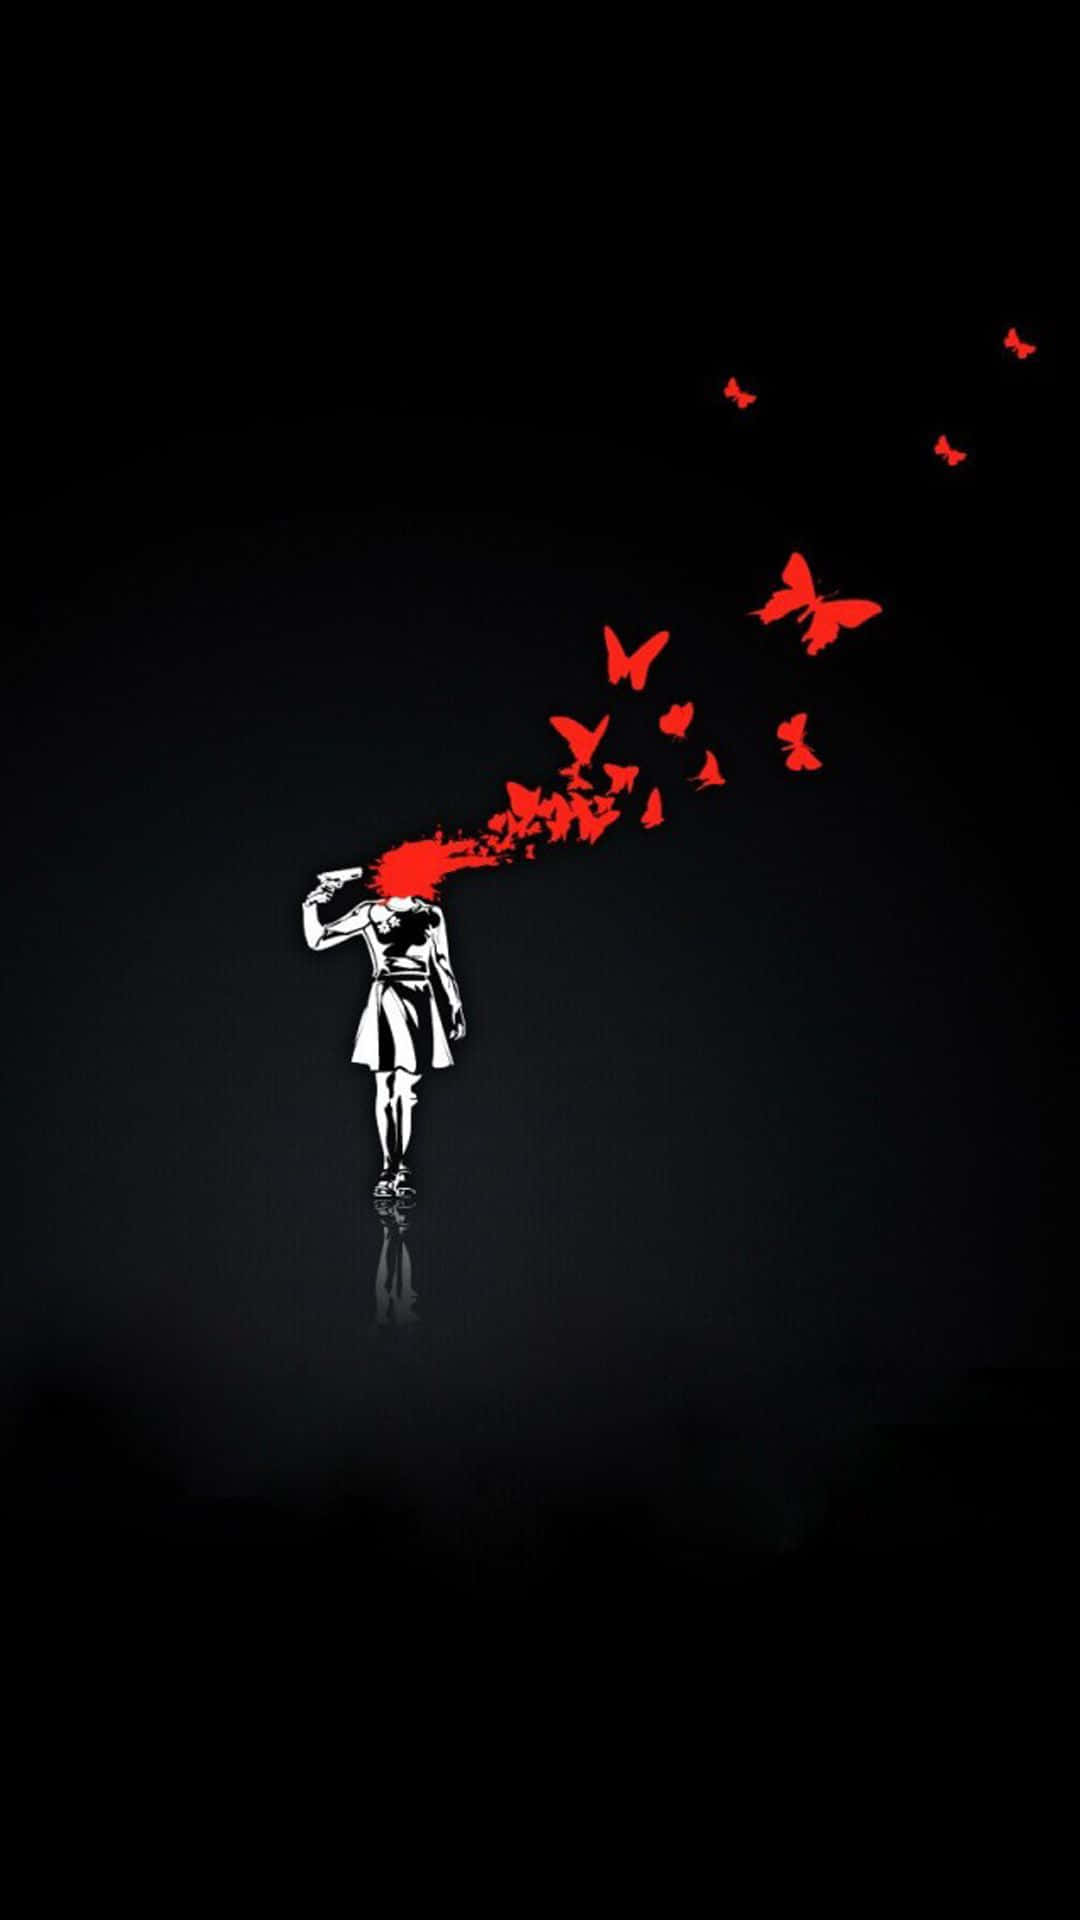 A Man With A Red Head And Wings Flying In The Dark Wallpaper